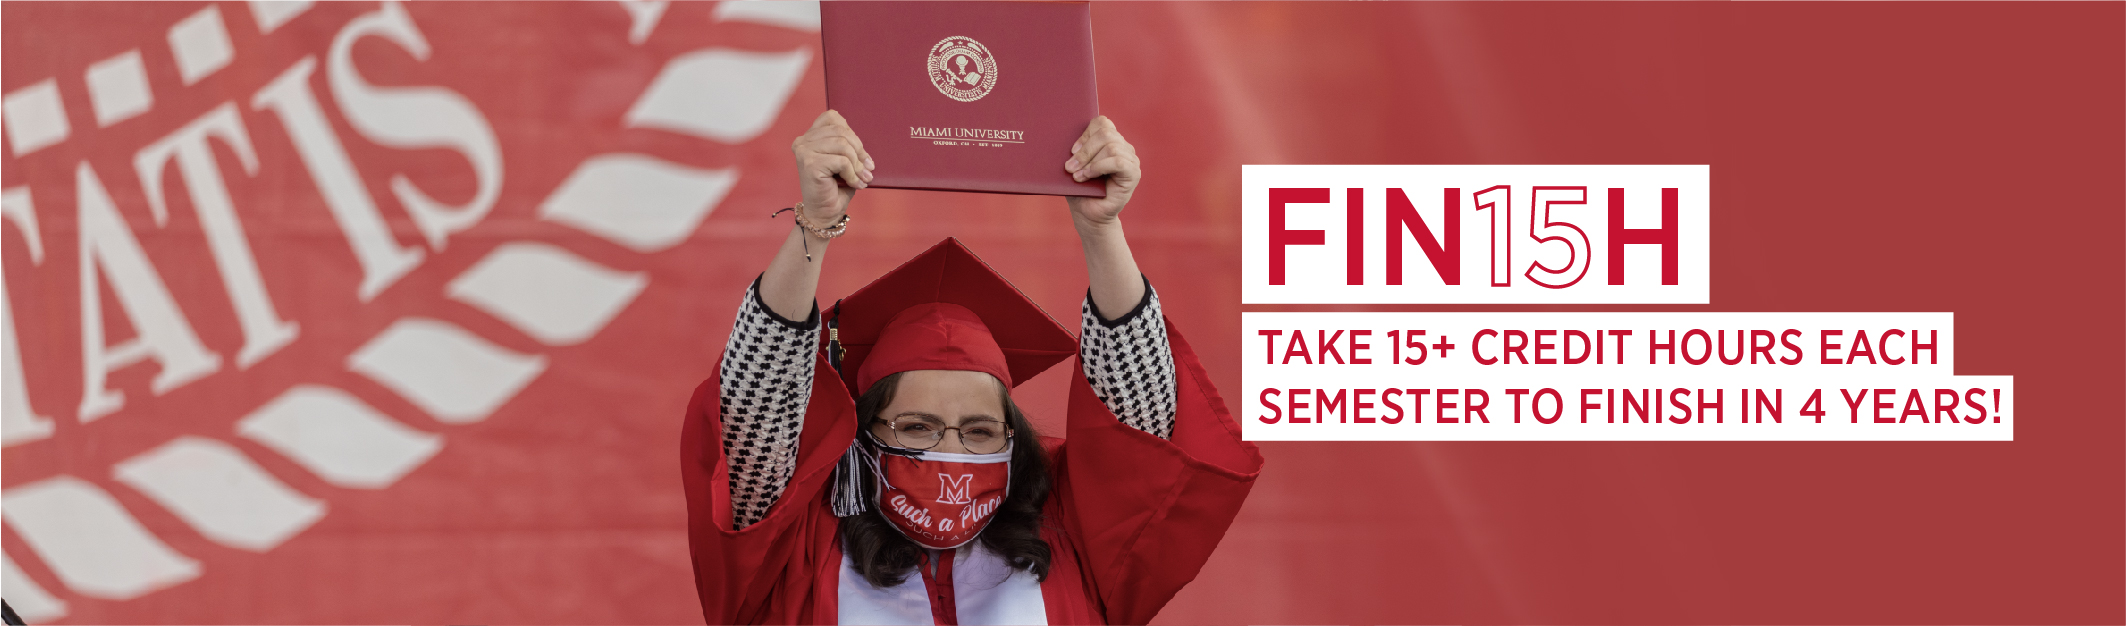 Fin15h. Take 15 credit hours each semester to graduate in 4 years. 